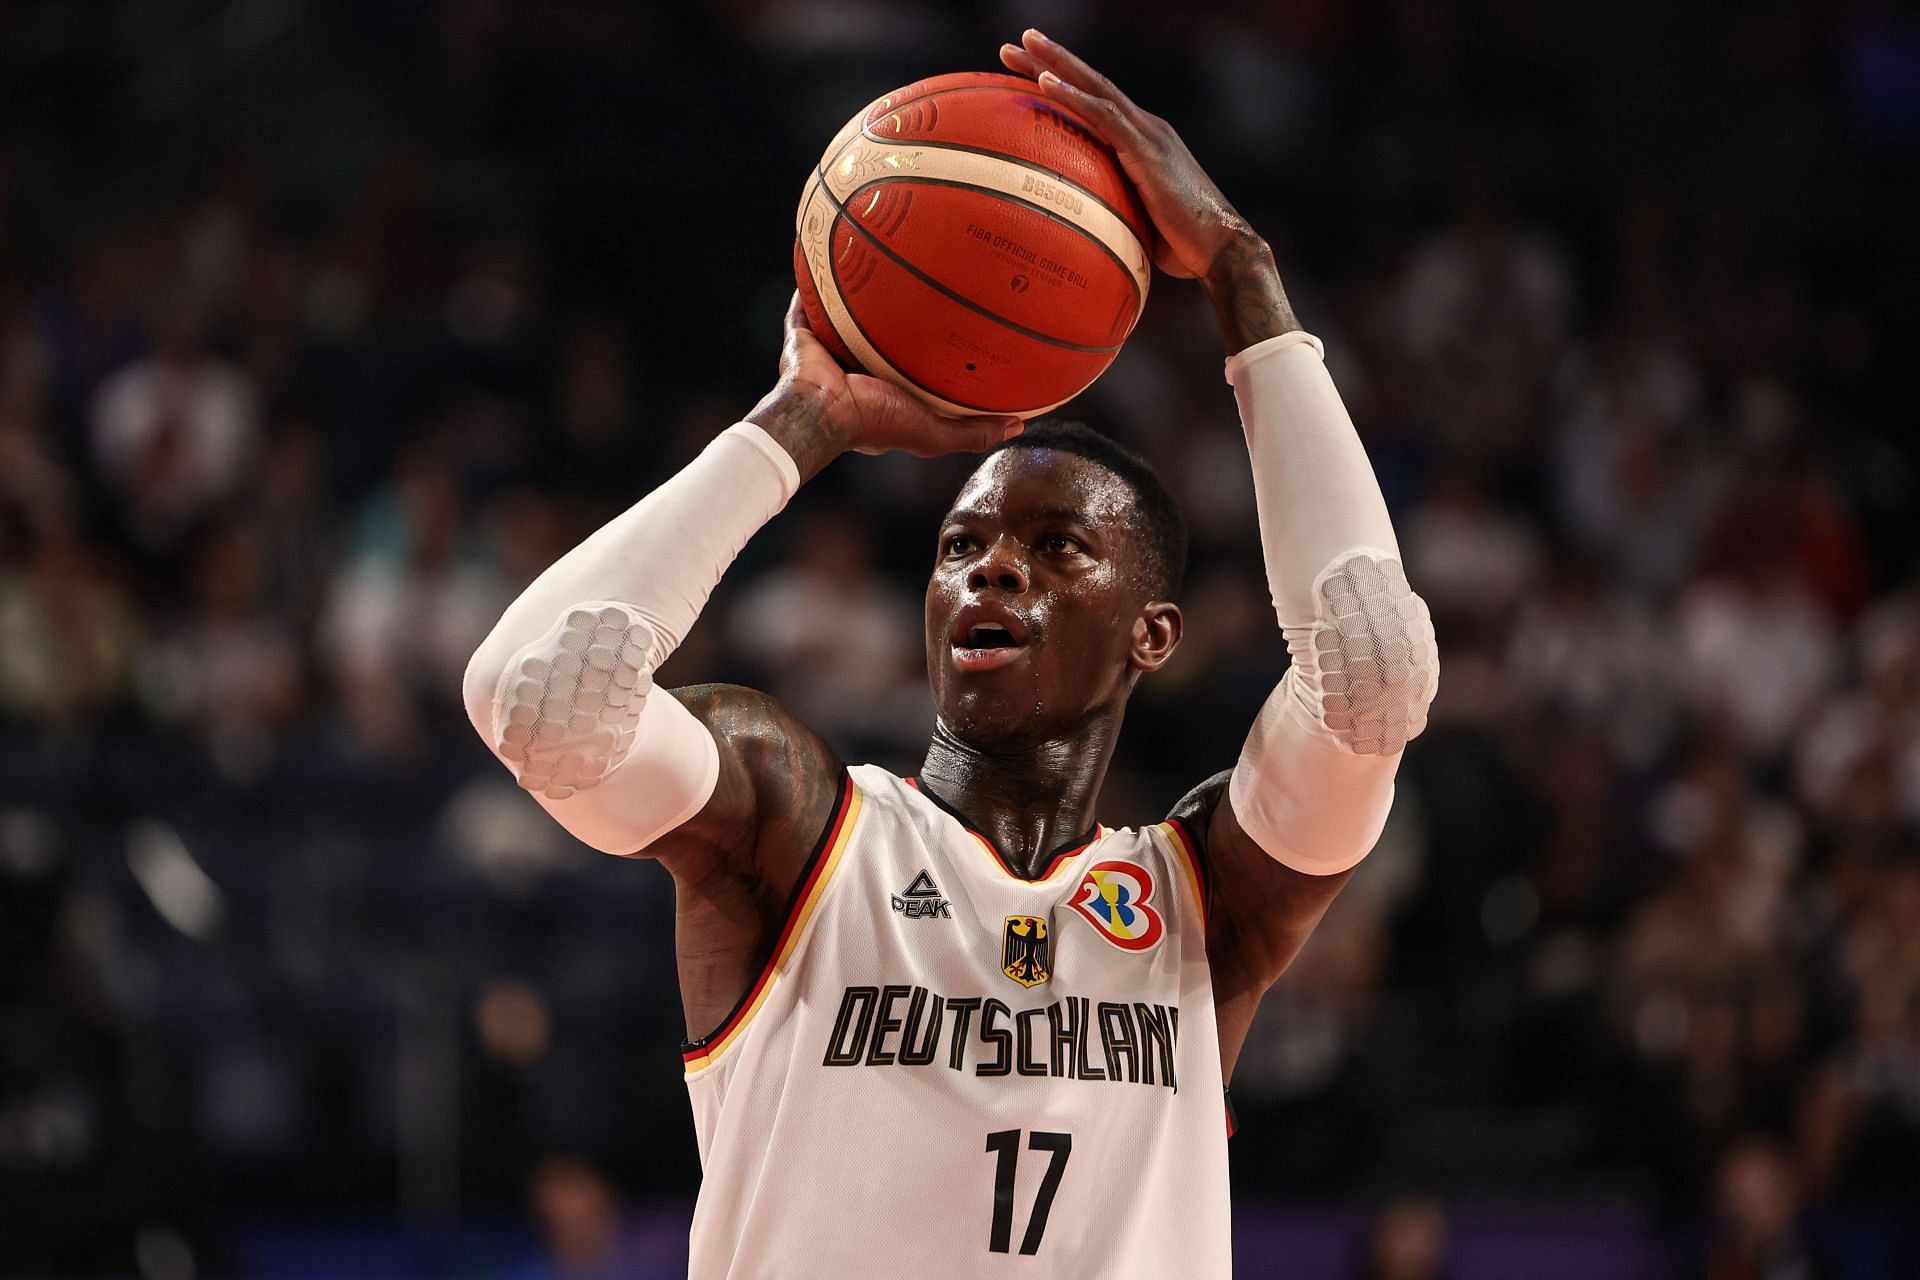 Dennis Schroder in action during his 24 point outing against Slovenia